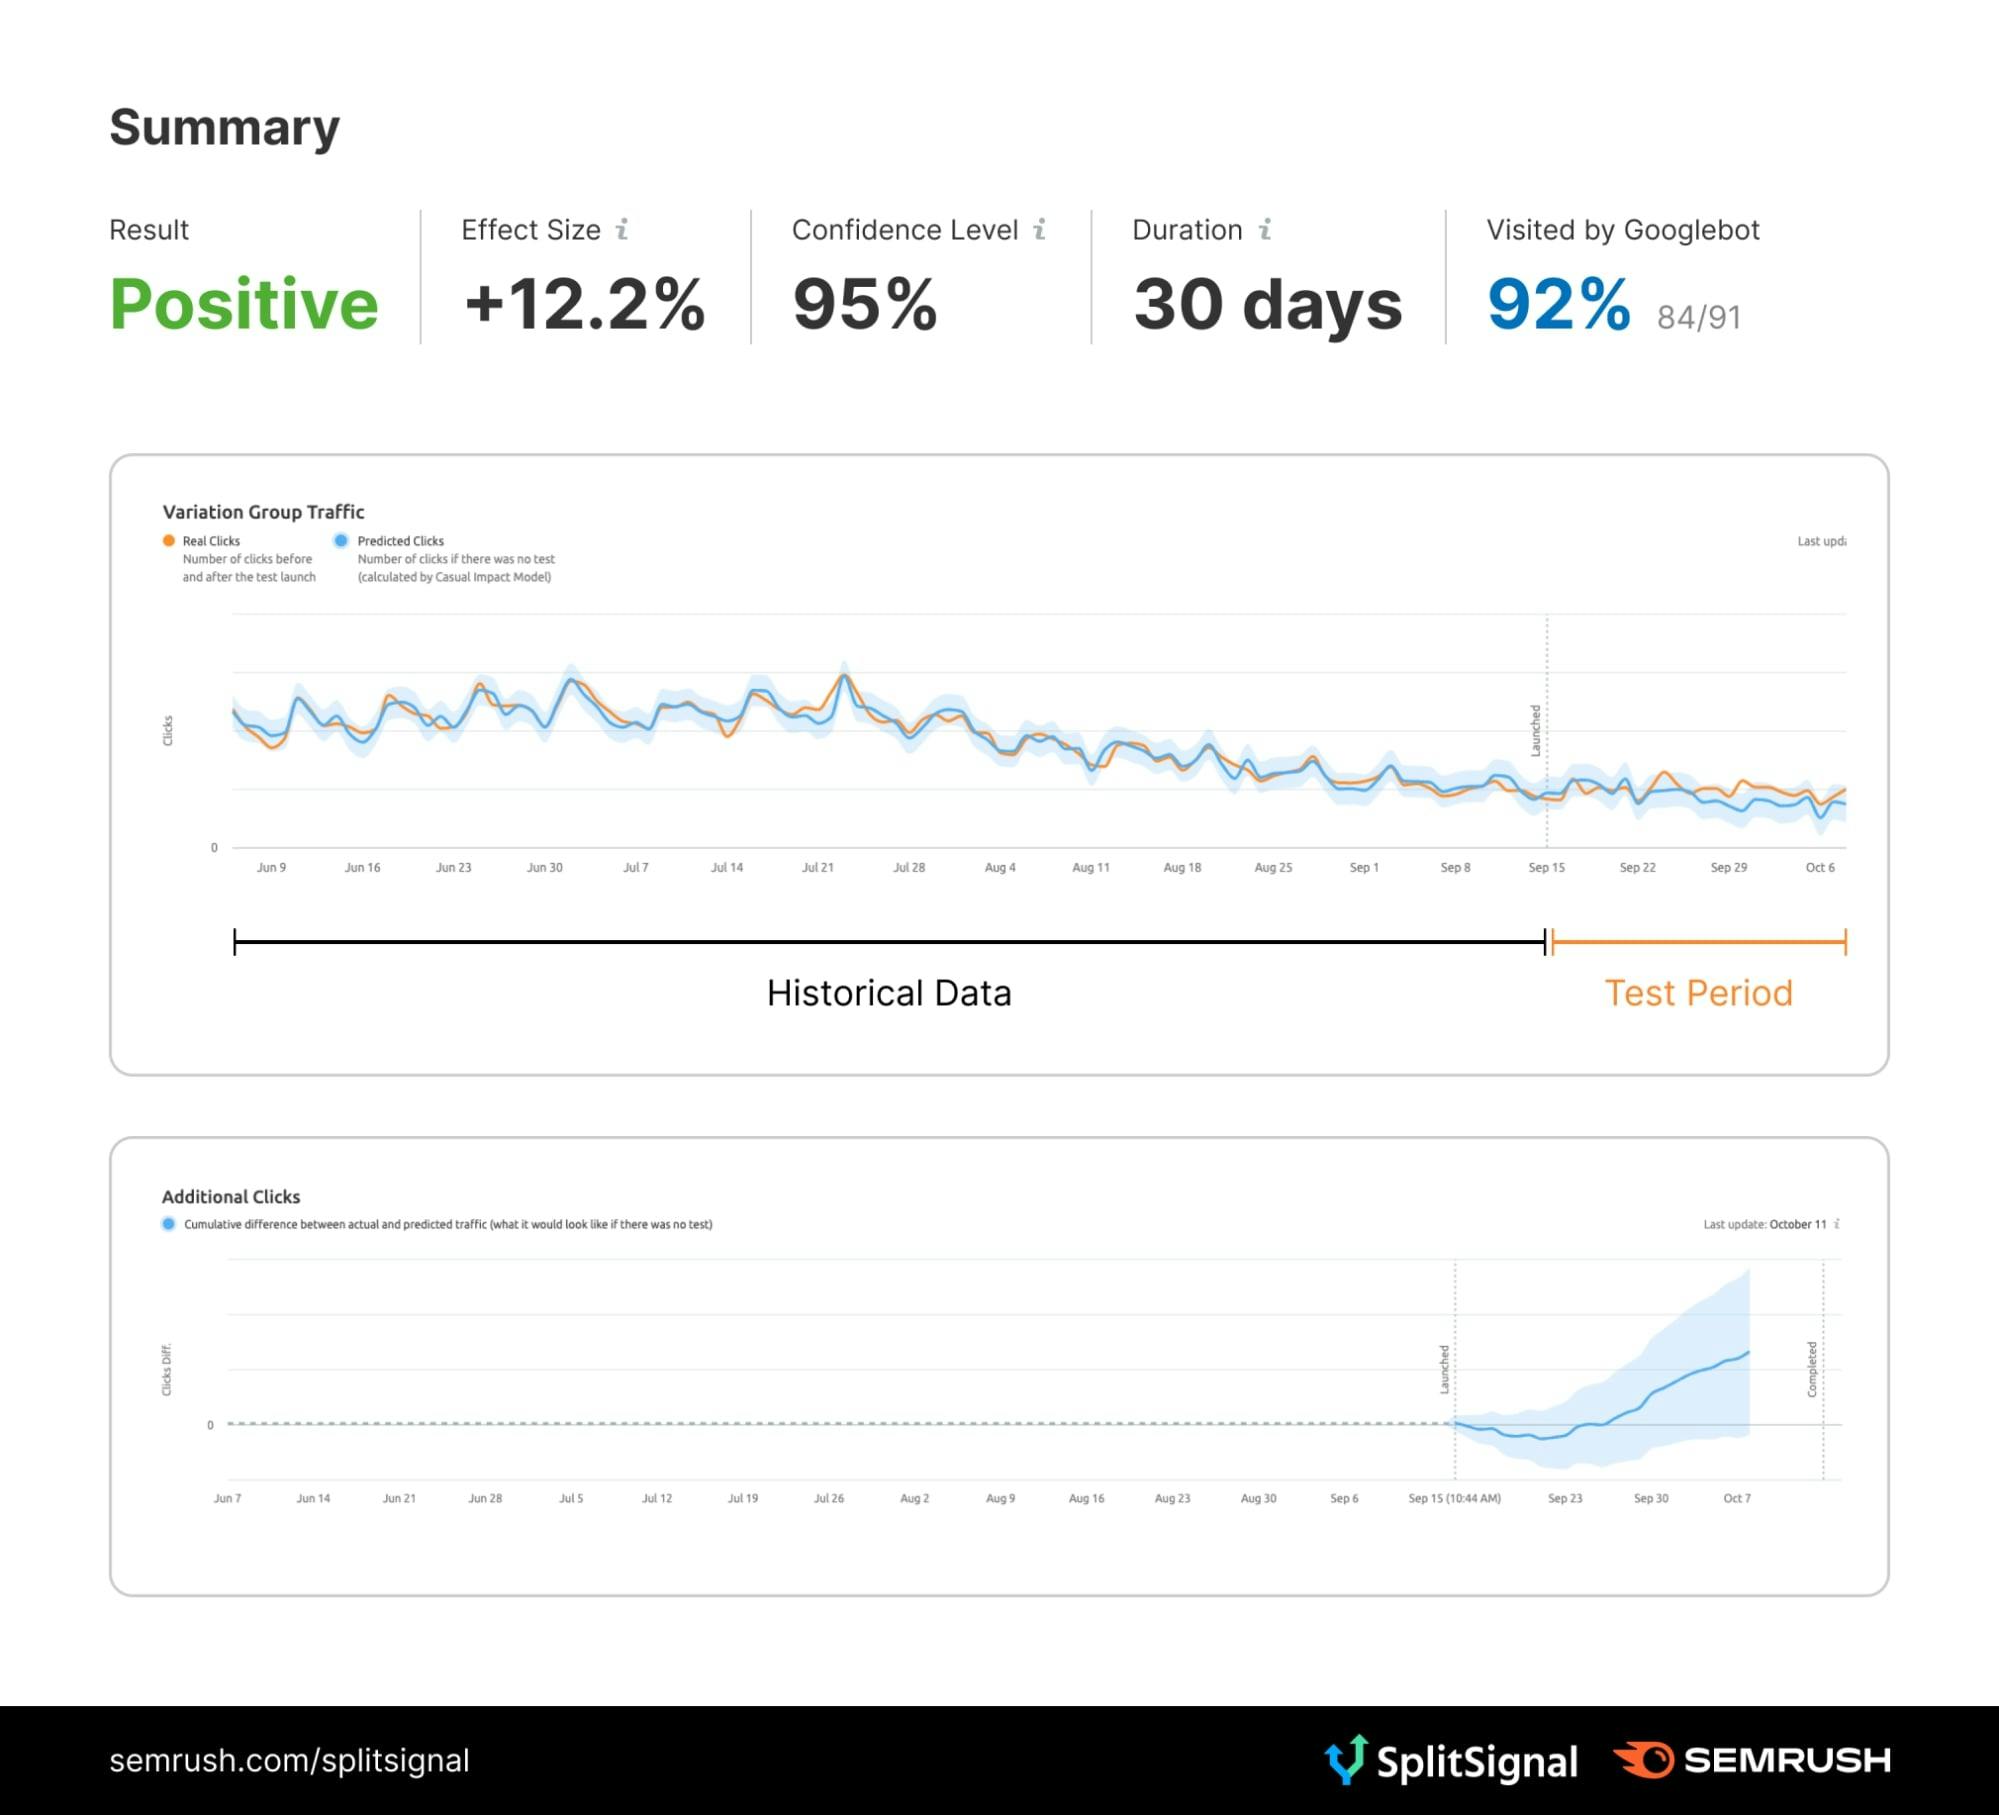 Summary. Result: Positive. Effect size +12.2%. Confidence level 95%. Duration 30 days. Visited by Google bot 92%.